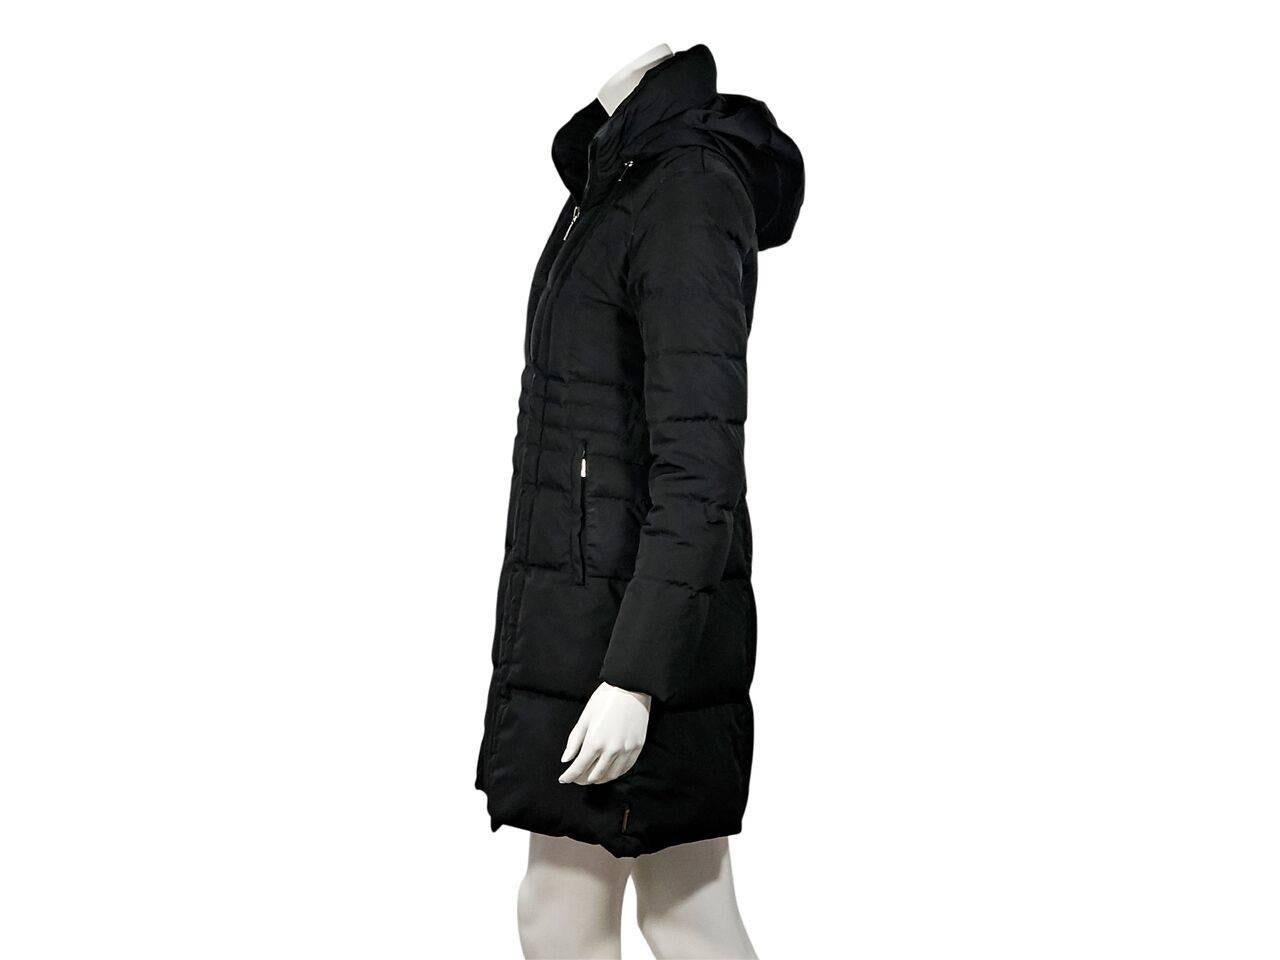 Product details:  Black puffer coat by Moncler.  Detachable hood.  Long sleeves.  Zip-front closure.  Waist zip pockets.  Seamwork creates a flattering silhouette. 
Condition: Pre-owned. Very good.
Est. Retail $ 998.00